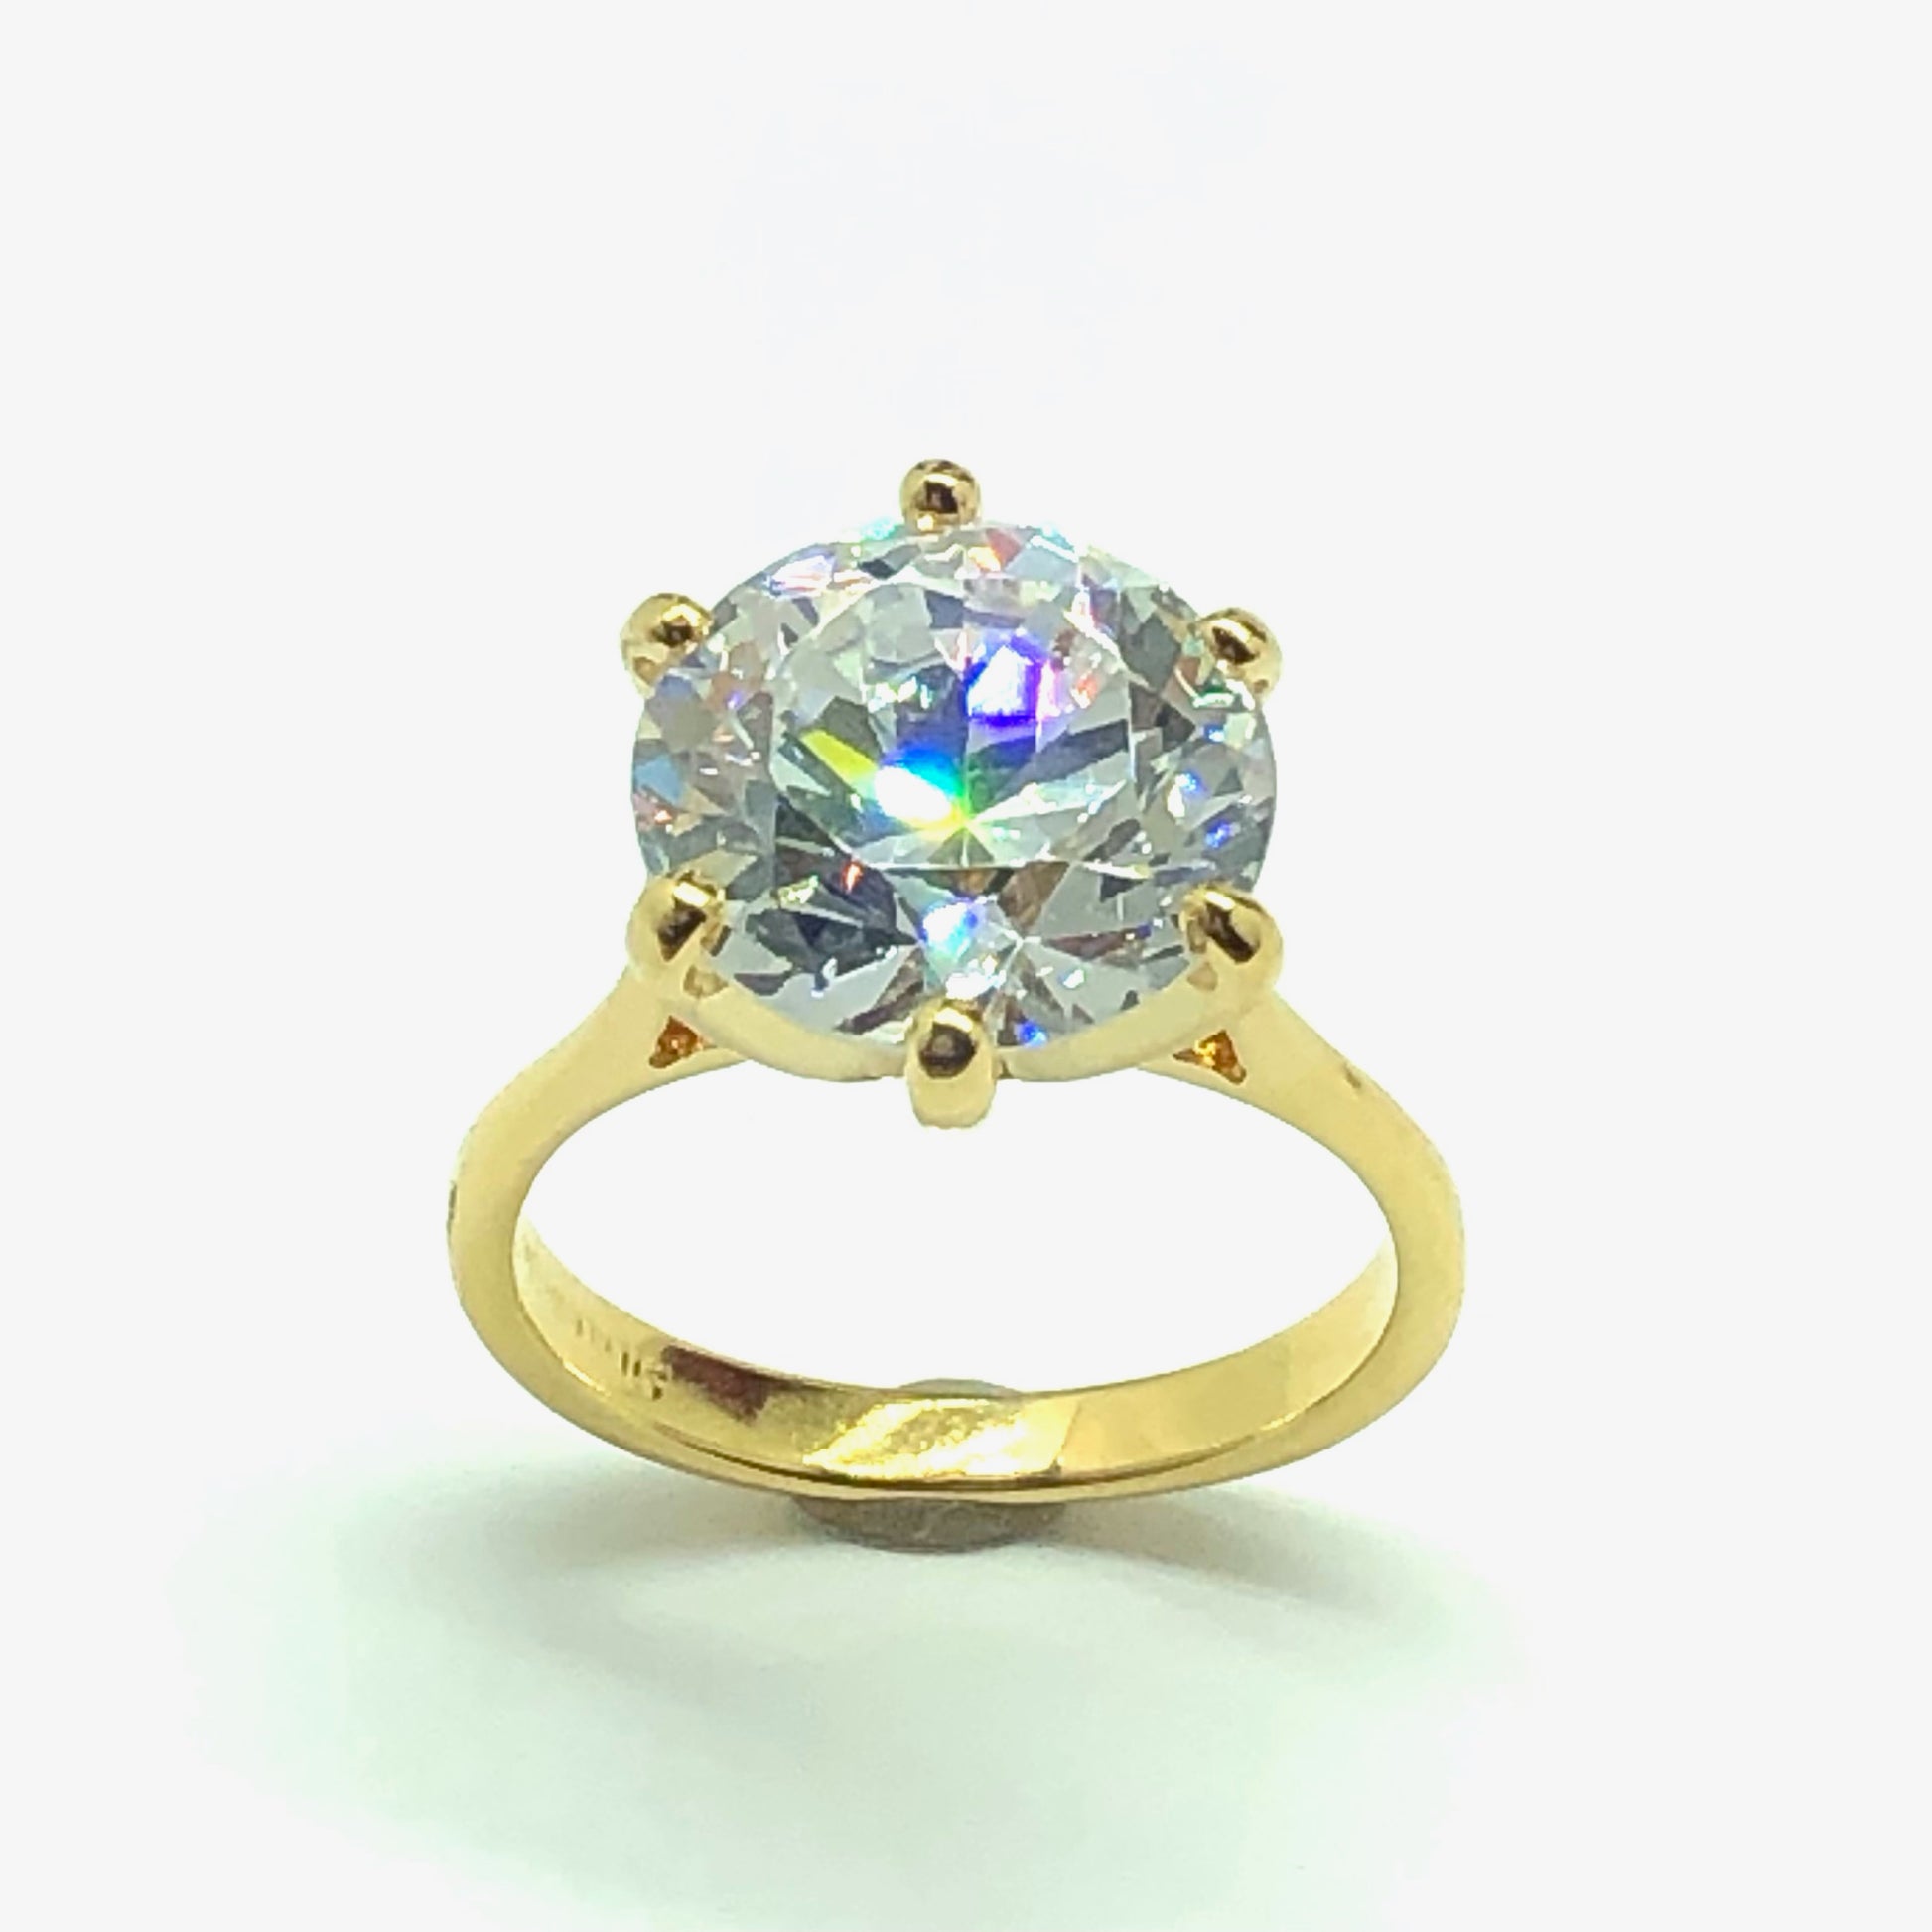 Jewelry used| Sparkly Girl Gold Sterling Silver BIG 8ct Diamond Alternative Cz Ring 